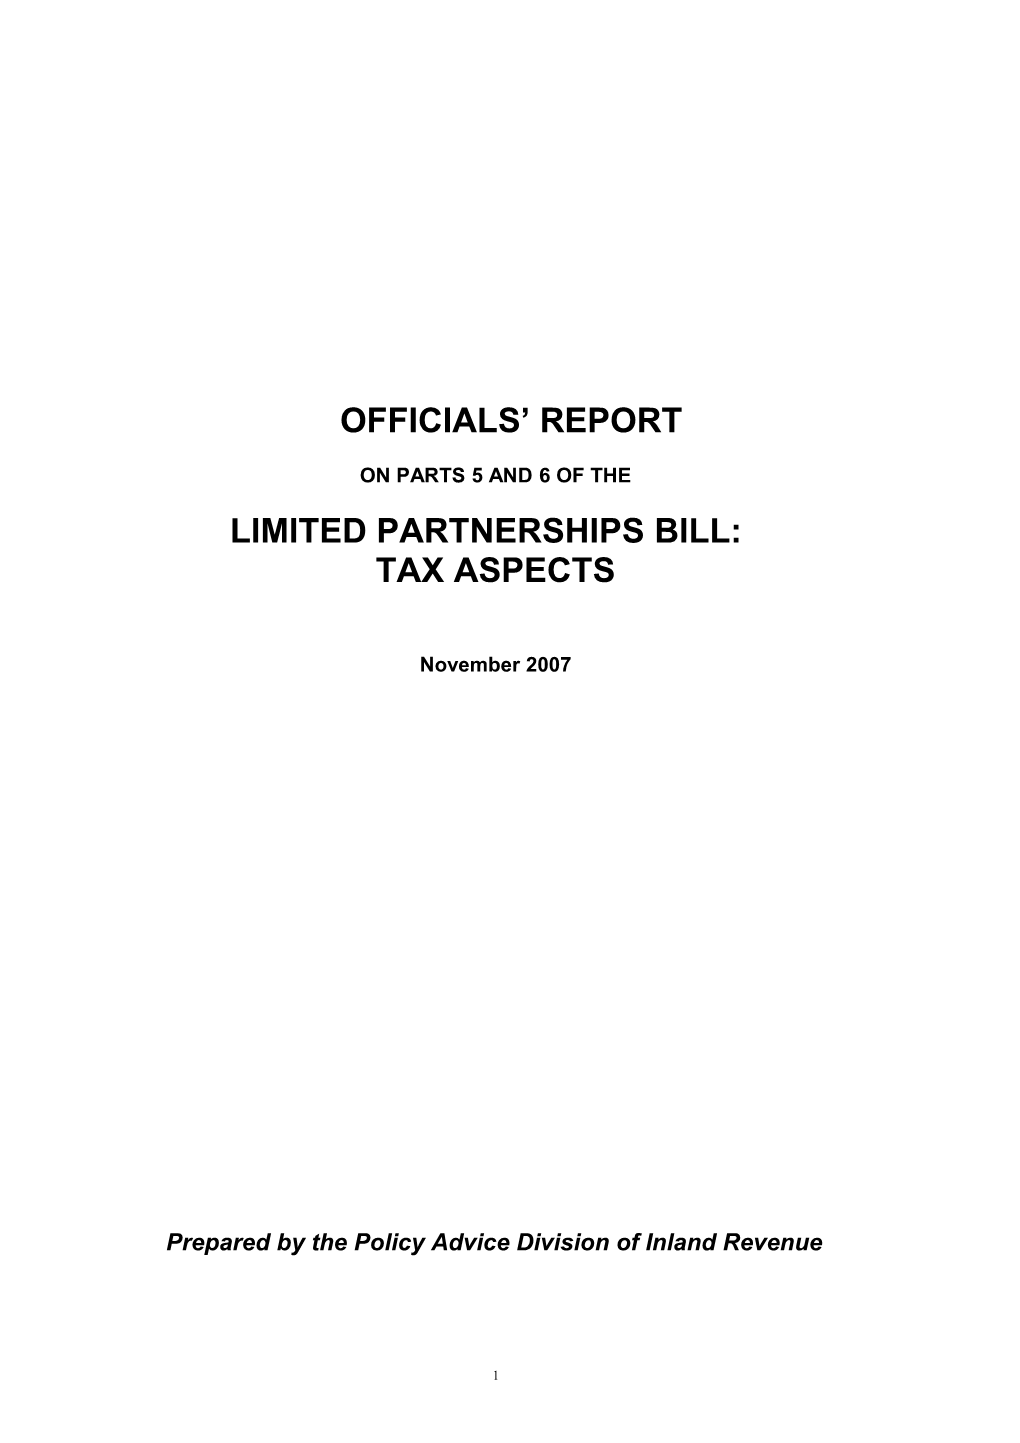 Officials' Report on Parts 5 and 6 of the Limited Partnerships Bill: Tax Aspects